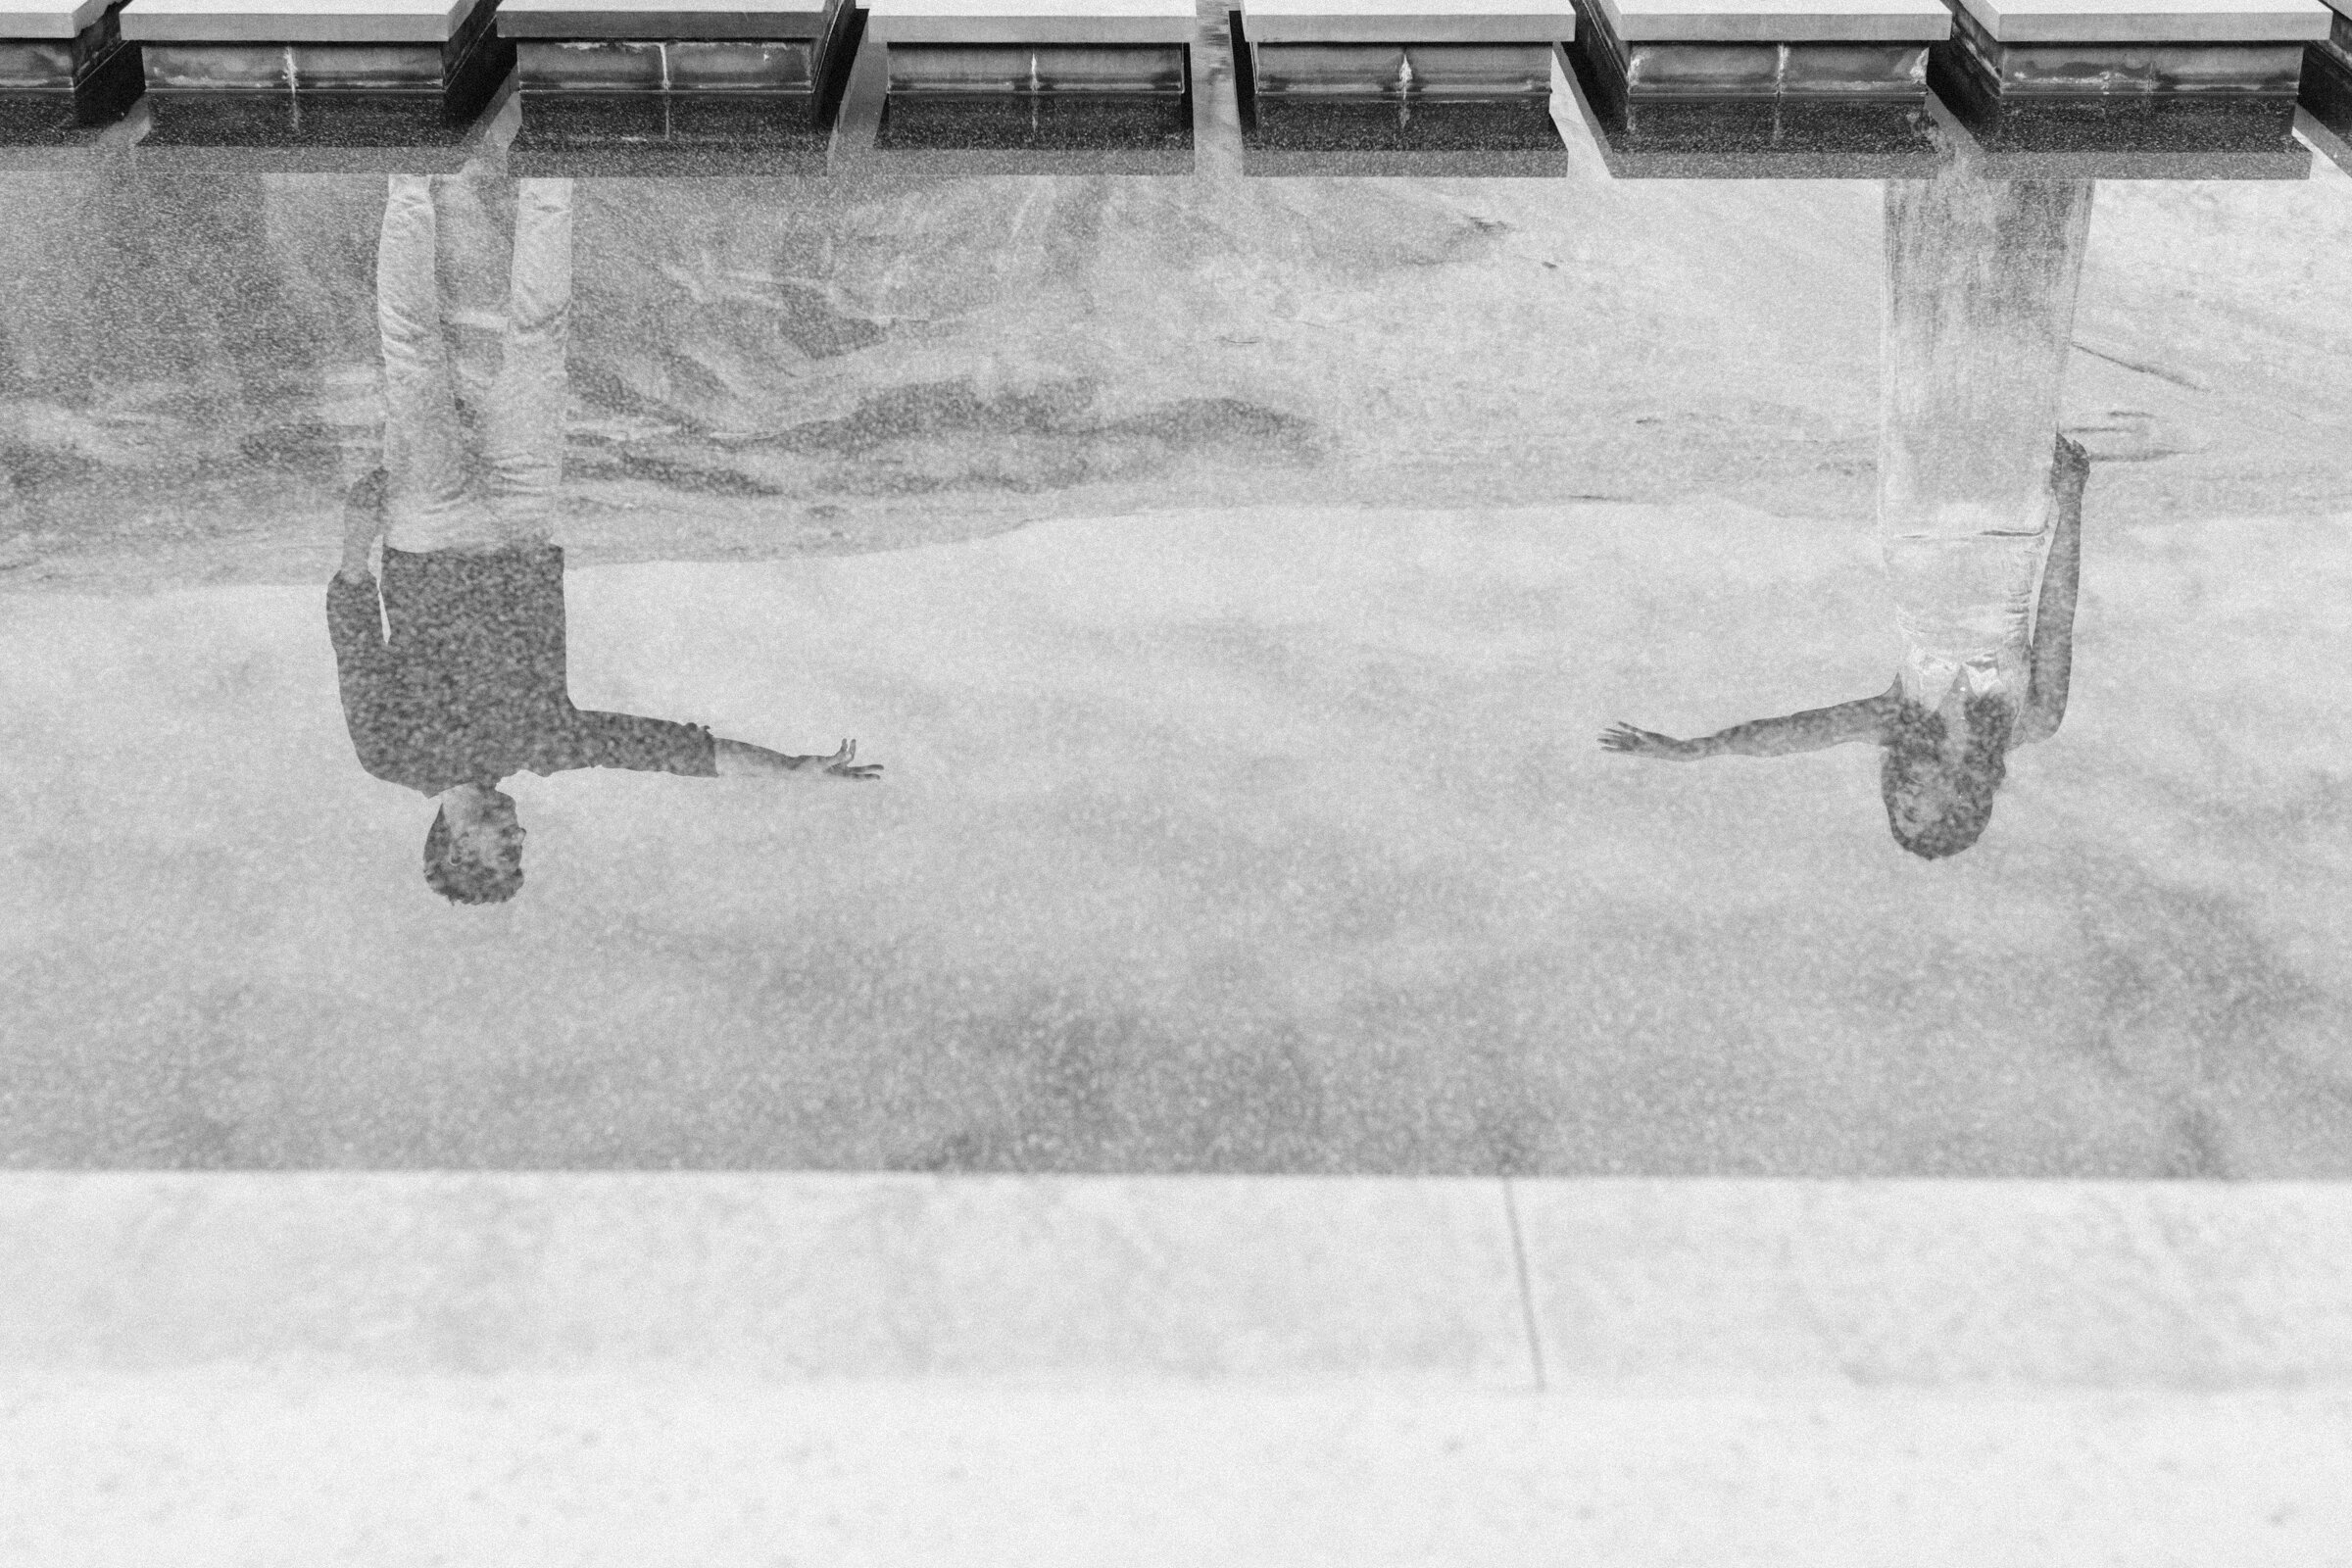 amangiri resort couple reflection in spa water reaching hands toward each other